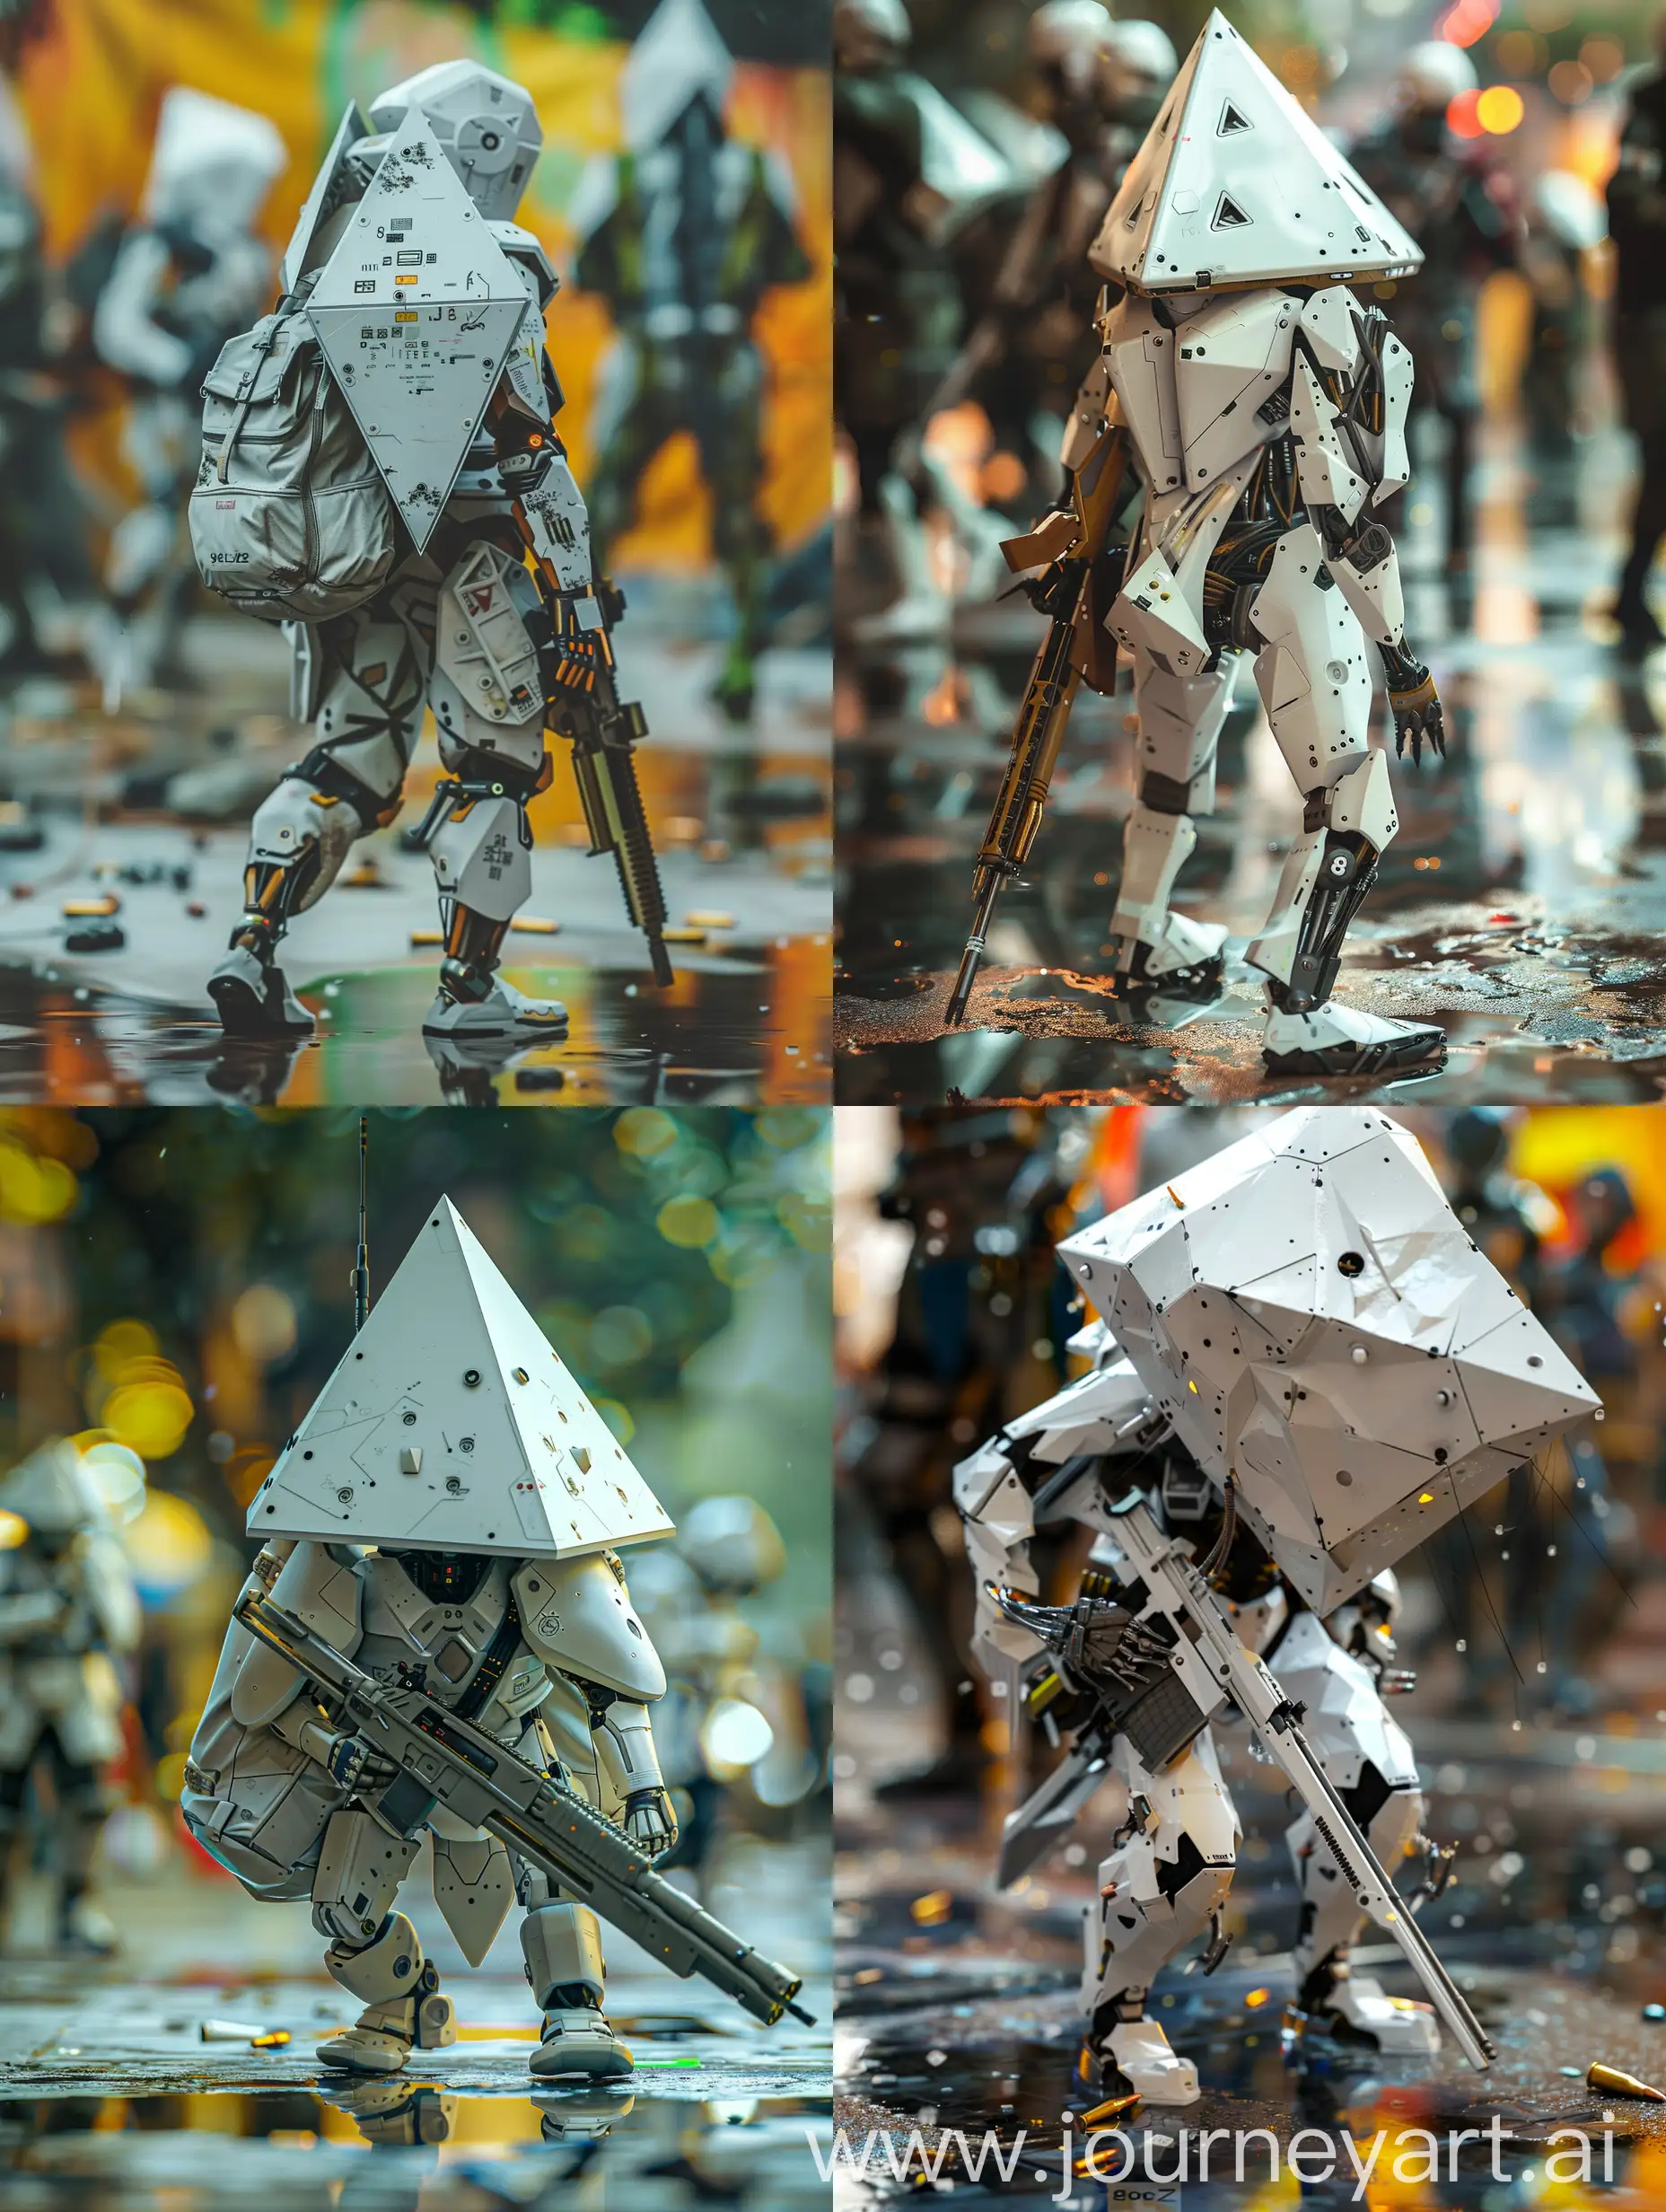 a close up cyberpunk Creative natural lighting, natural daytime lighting, zbrush, 8k, natural environment of a Chinese colourful vibrant forest, with other people, unique angles, epic lighting, ultradetailed, dslr, futuristic, nikon d750, lomo  with a  weapon bag showing a human cybnetic white triangular bioroid super advanced soldier with a triangular shaped helmet and facial interface of artificial components with alien cybernetic enhancements, such as neural interfaces, robotic limbs and ocular implants ,the armor is  revealing the hexagonal  armor which is adorned with intricate detailing, carrying a gleaming rifle to the, amidst reflections on the gritty floor. Each element is rendered in stunning high definition, capturing the essence of the cyberpunk world with unparalleled realism in this digital art piece.